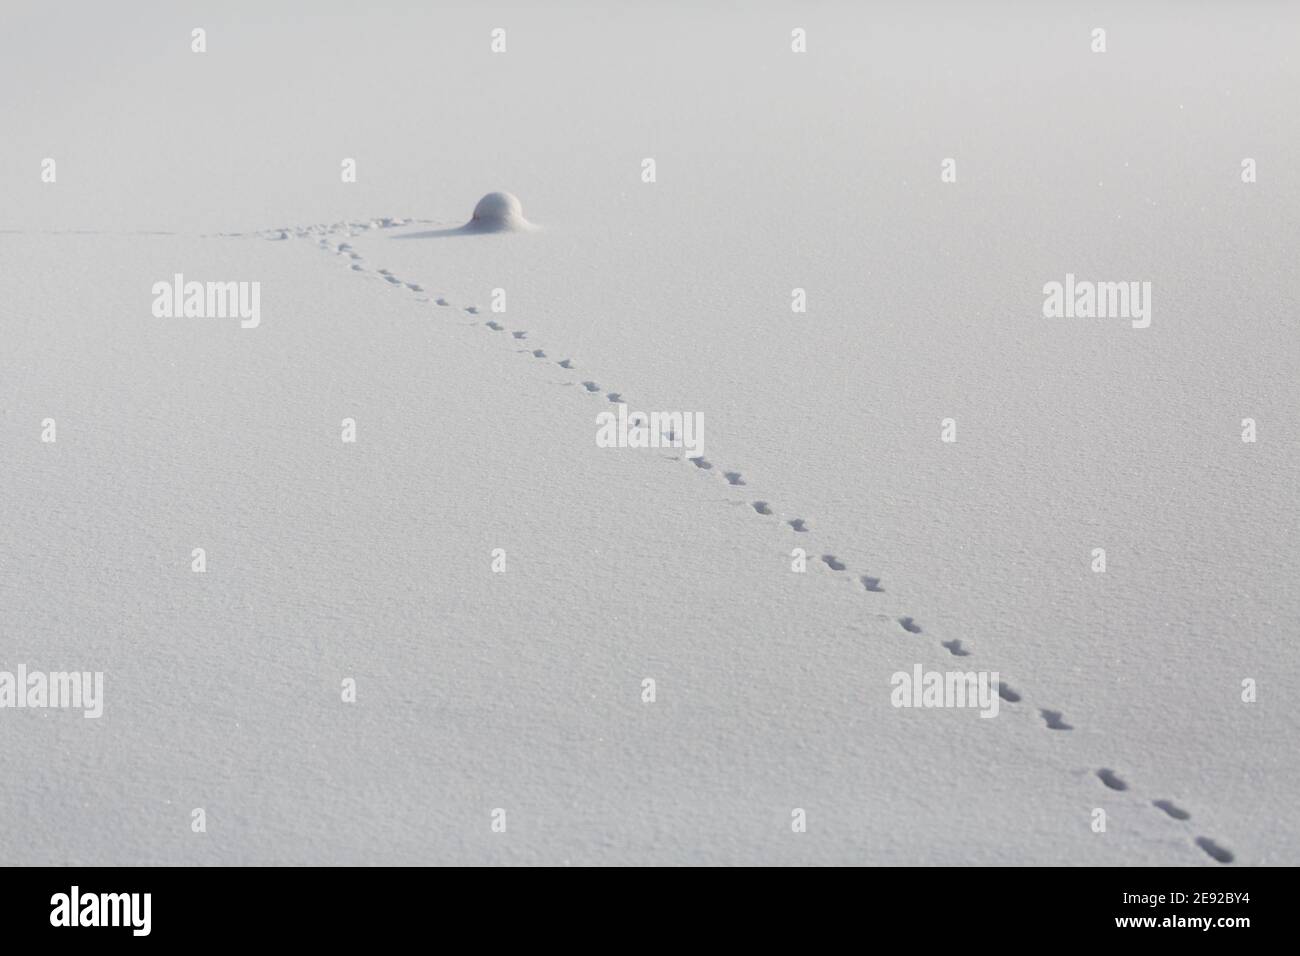 Footprints in the snow leading to an object covered with snow. With tracks of an unknown animal. Stock Photo